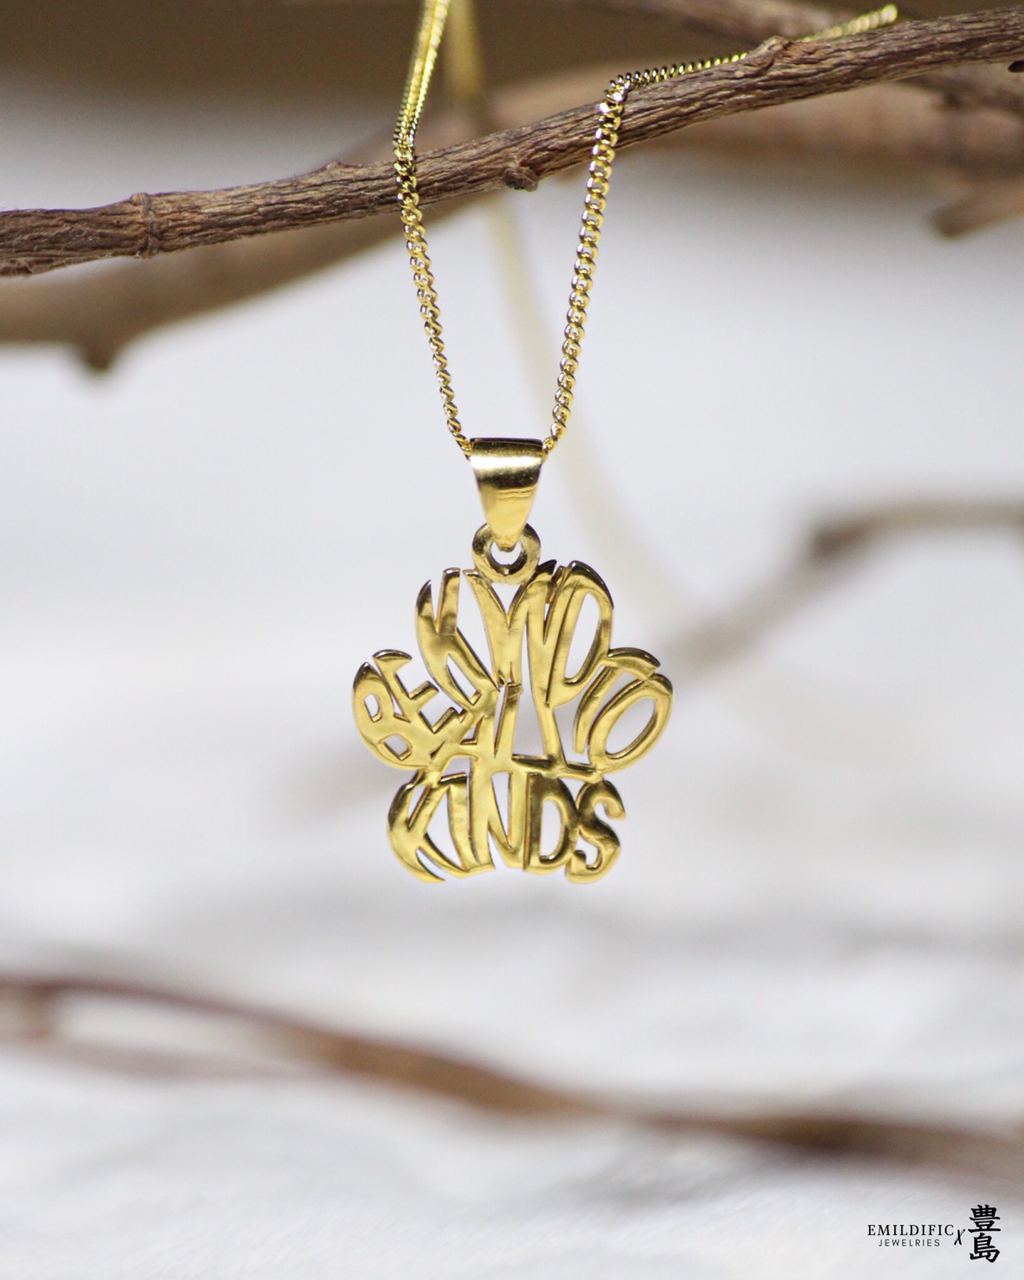 Paw Necklace that donates to Animals in Need